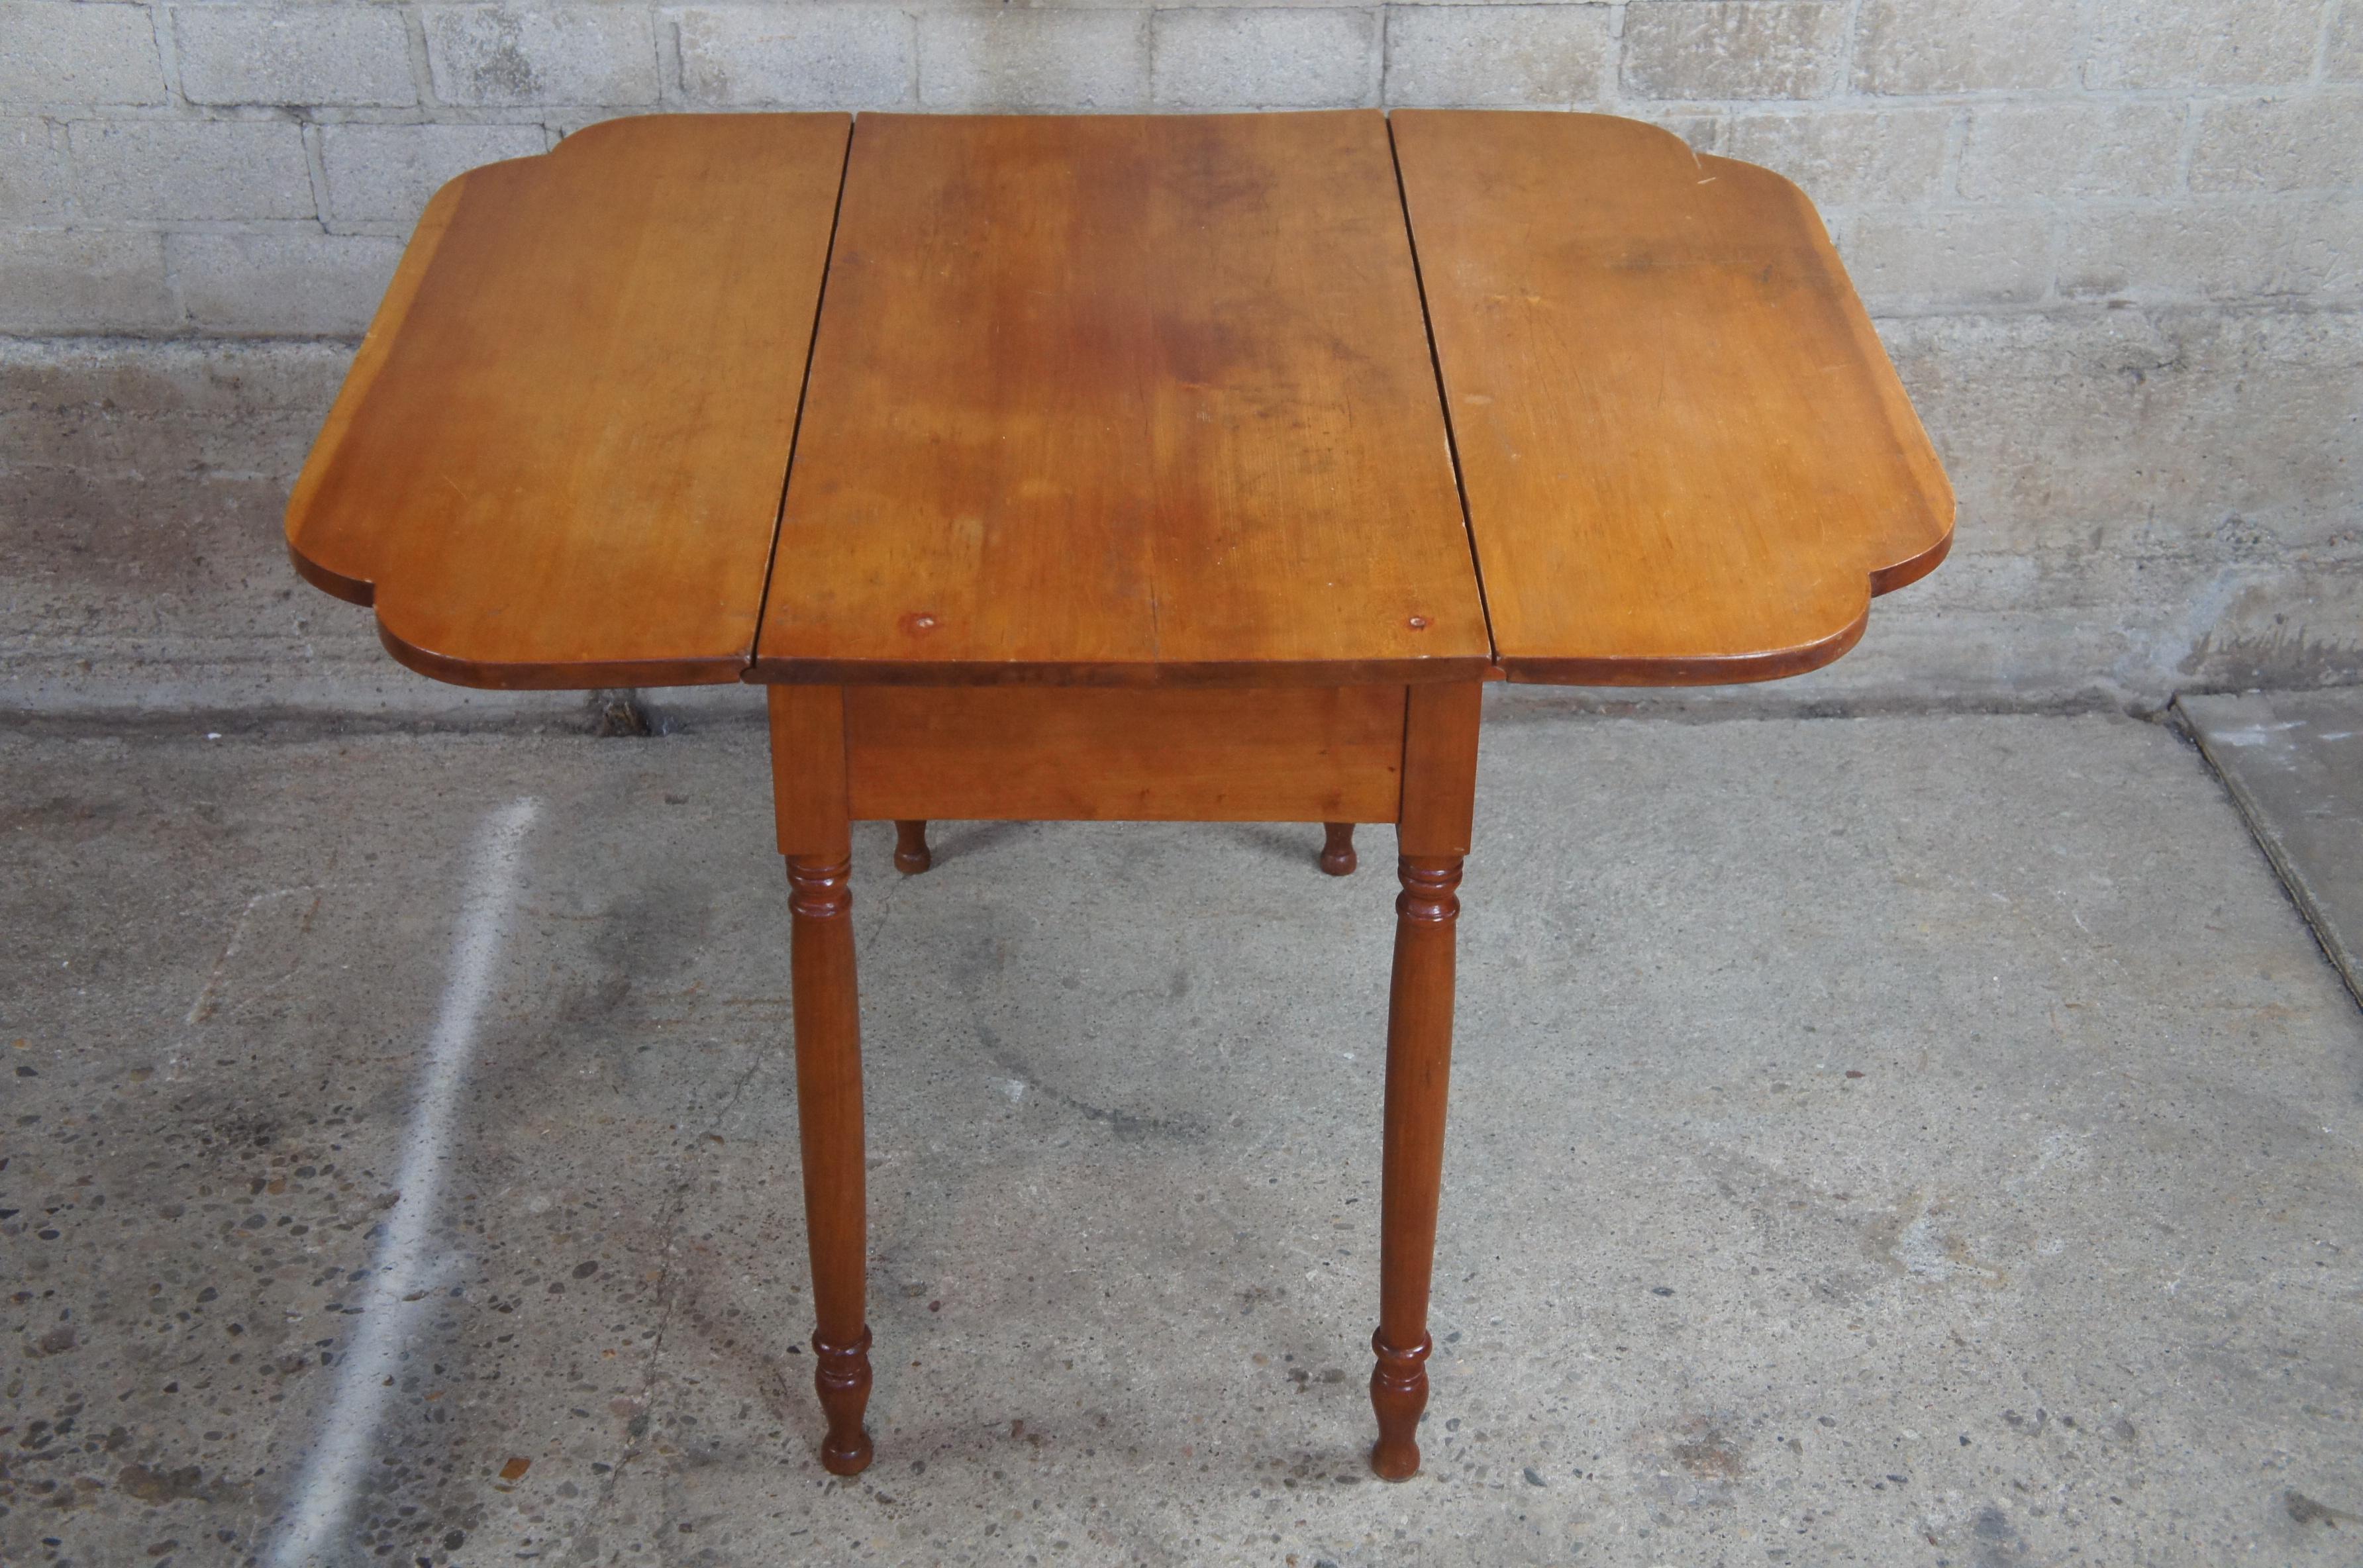 19th Century Antique Early American Cherry Drop-Leaf Dining Table Country Farmhouse